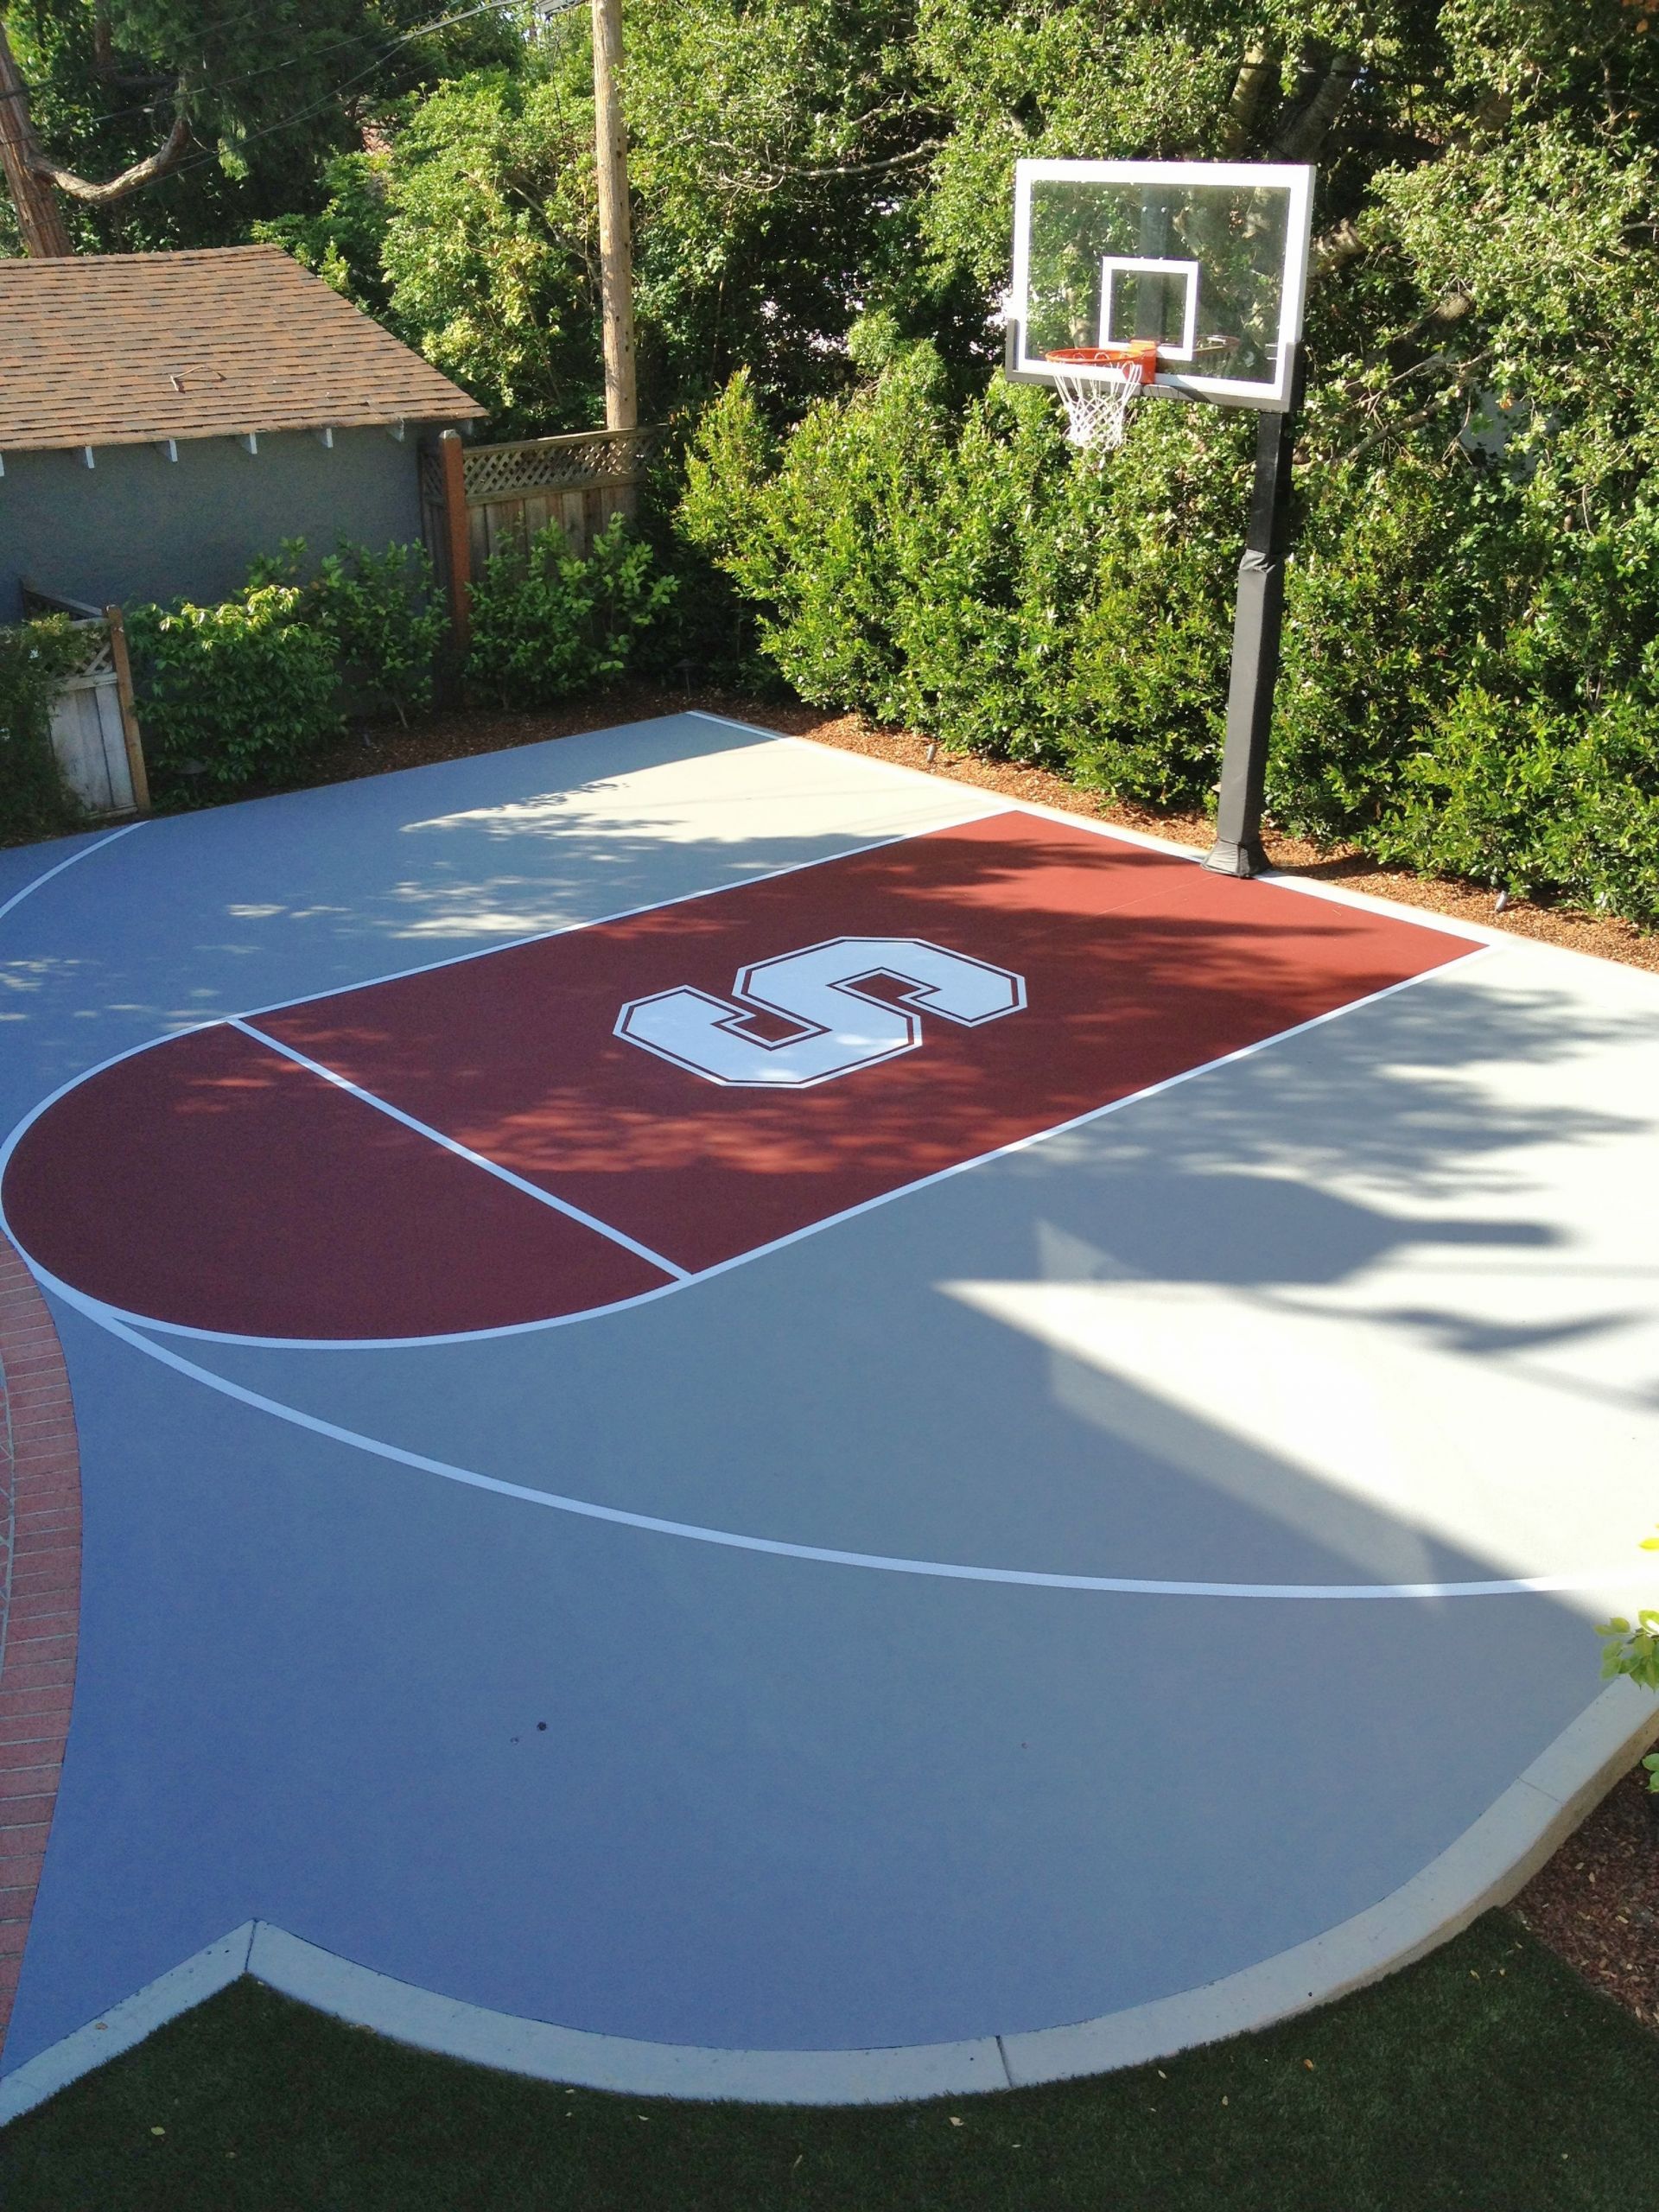 Backyard Half Court Basketball
 Mark has created a great Stanford half court in his